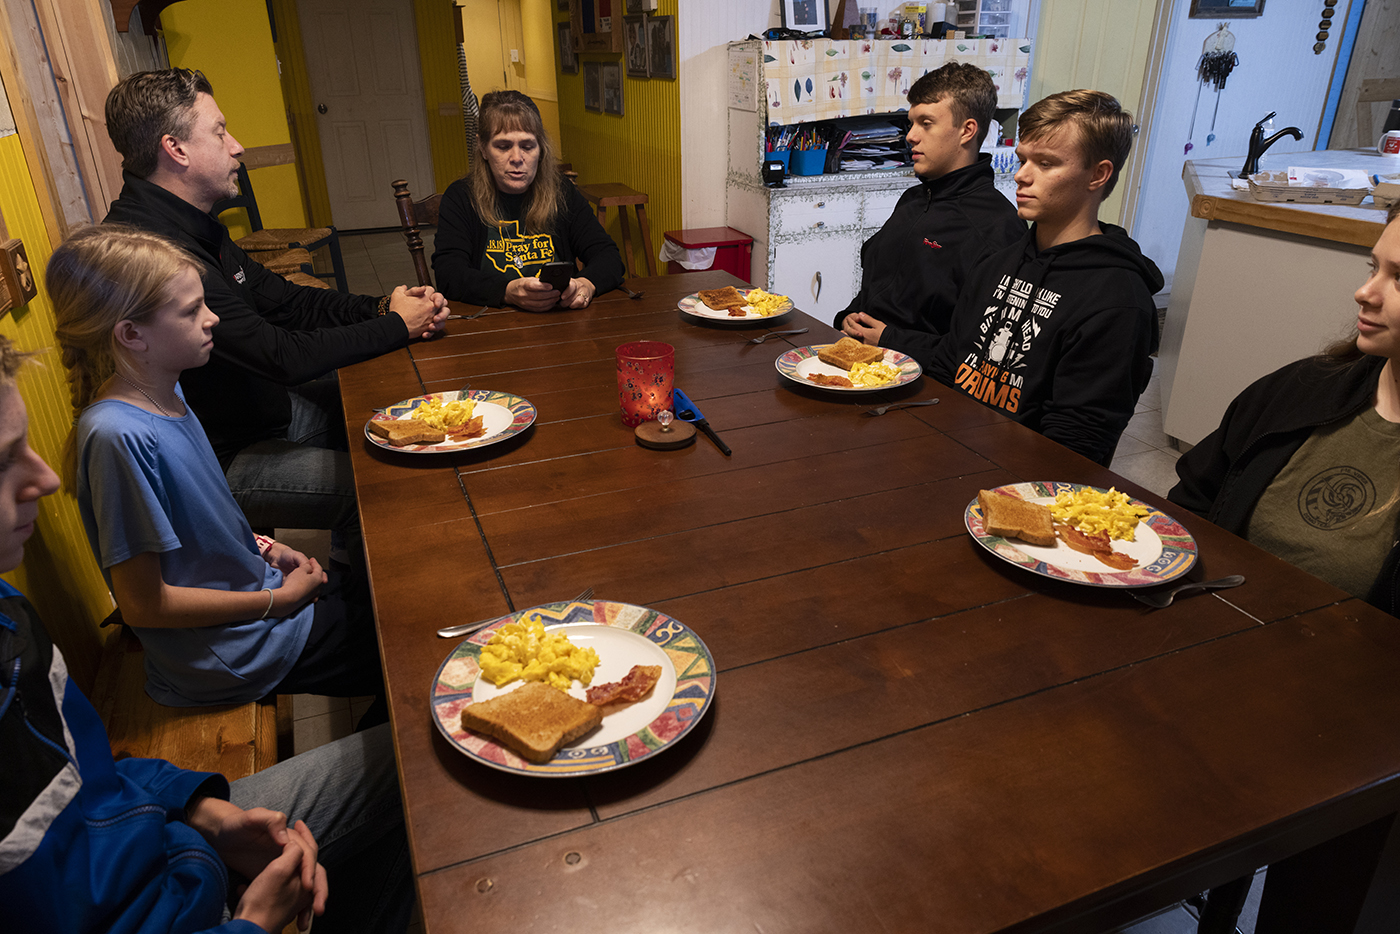 The Clements family, owners of Clements Family Farm in Santa Fe, recites prayers during breakfast after feeding the animals at their farm, Monday, Jan. 30, 2023